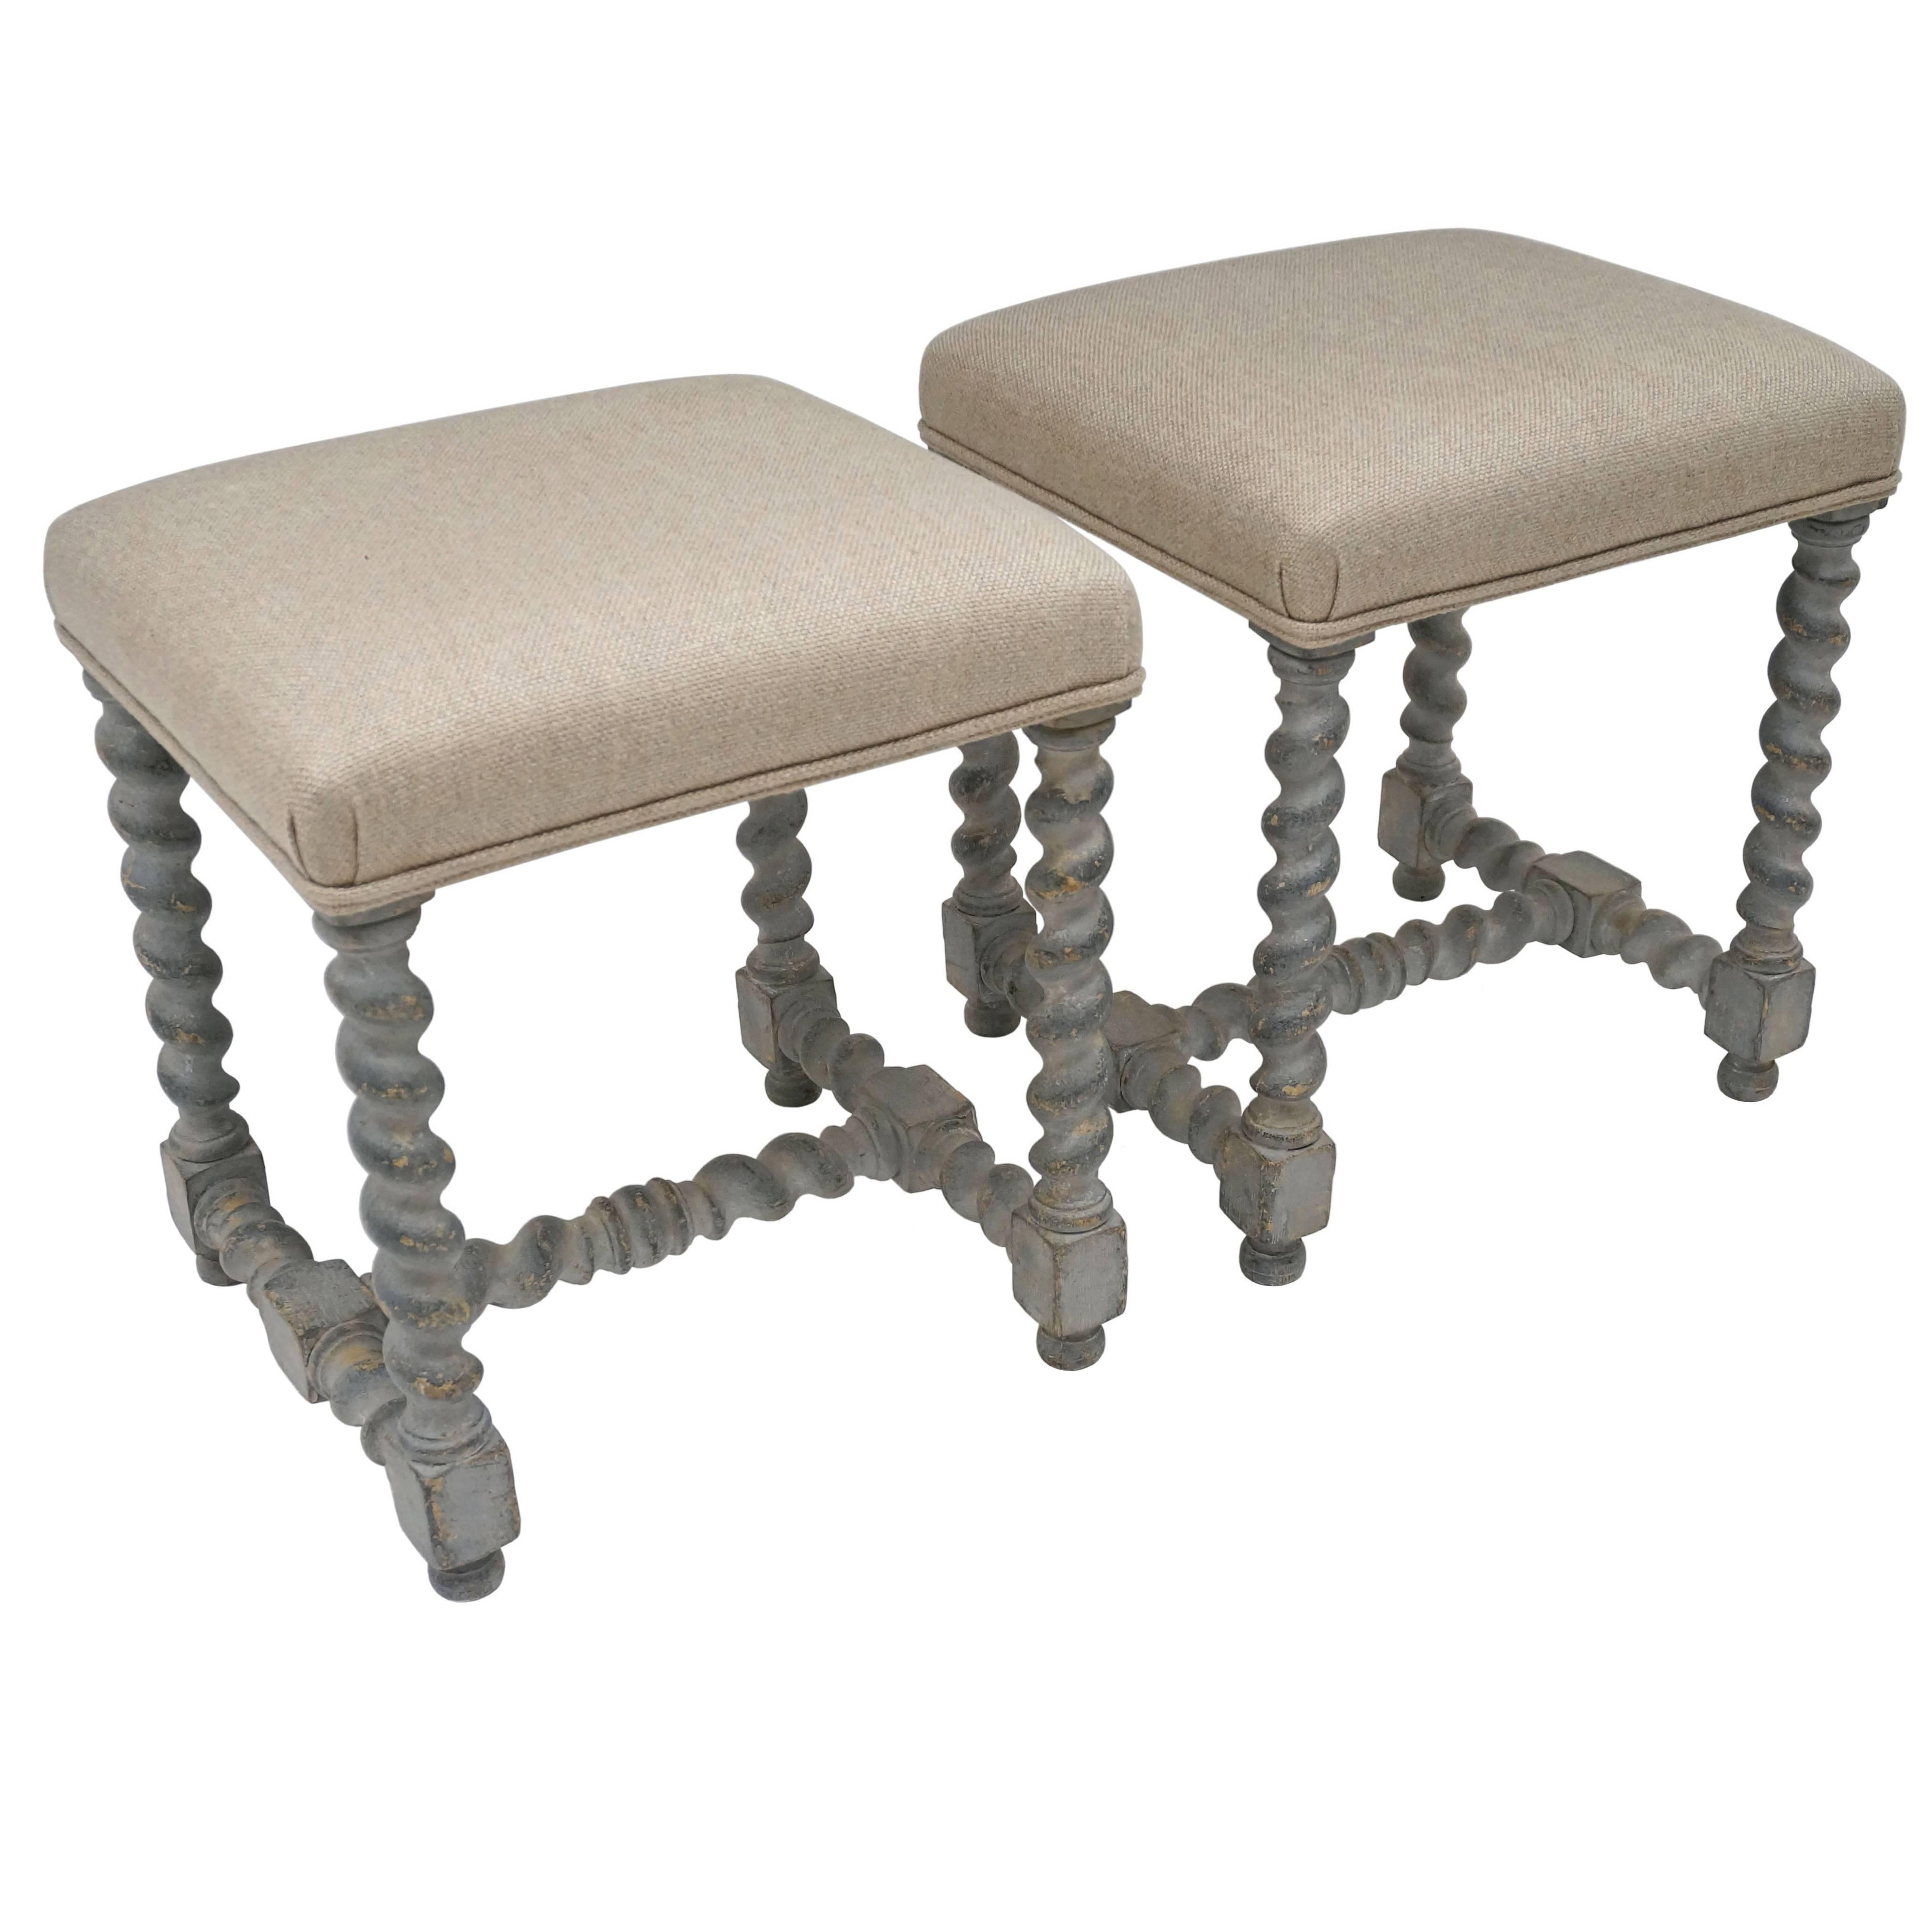 Pair of Antique Painted Gray Stools with Upholstered Seats, Belgium, circa 1900s